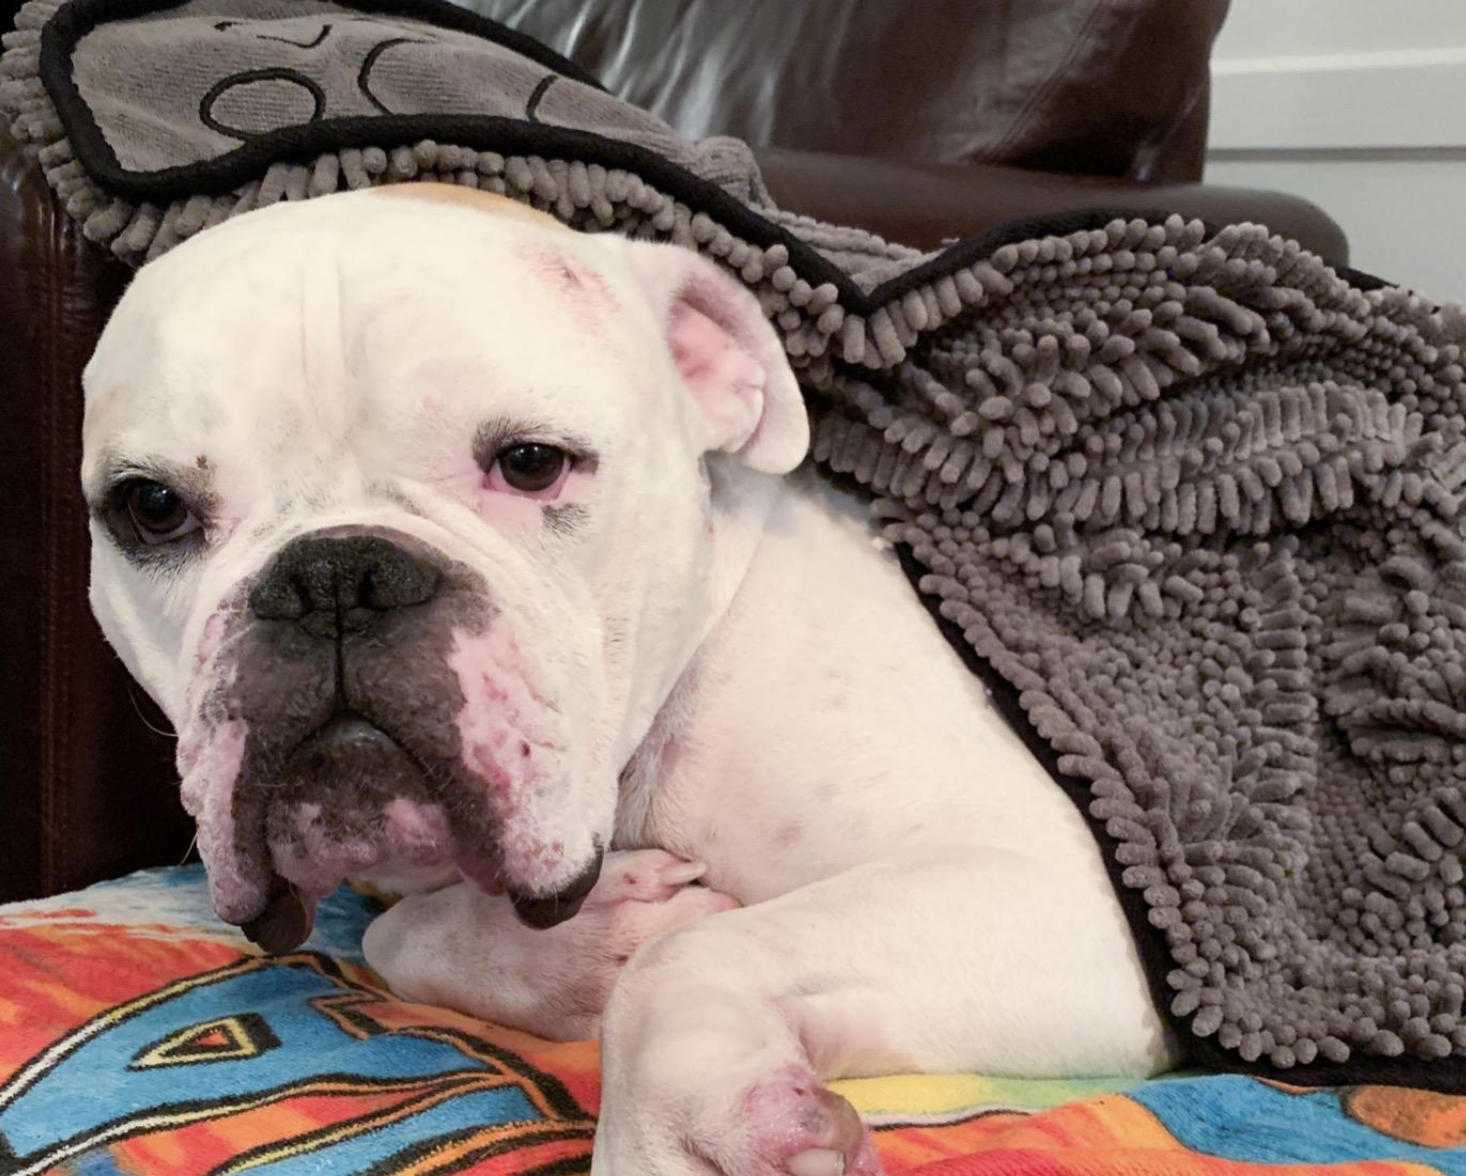 A customer review photo of their dog in the towel